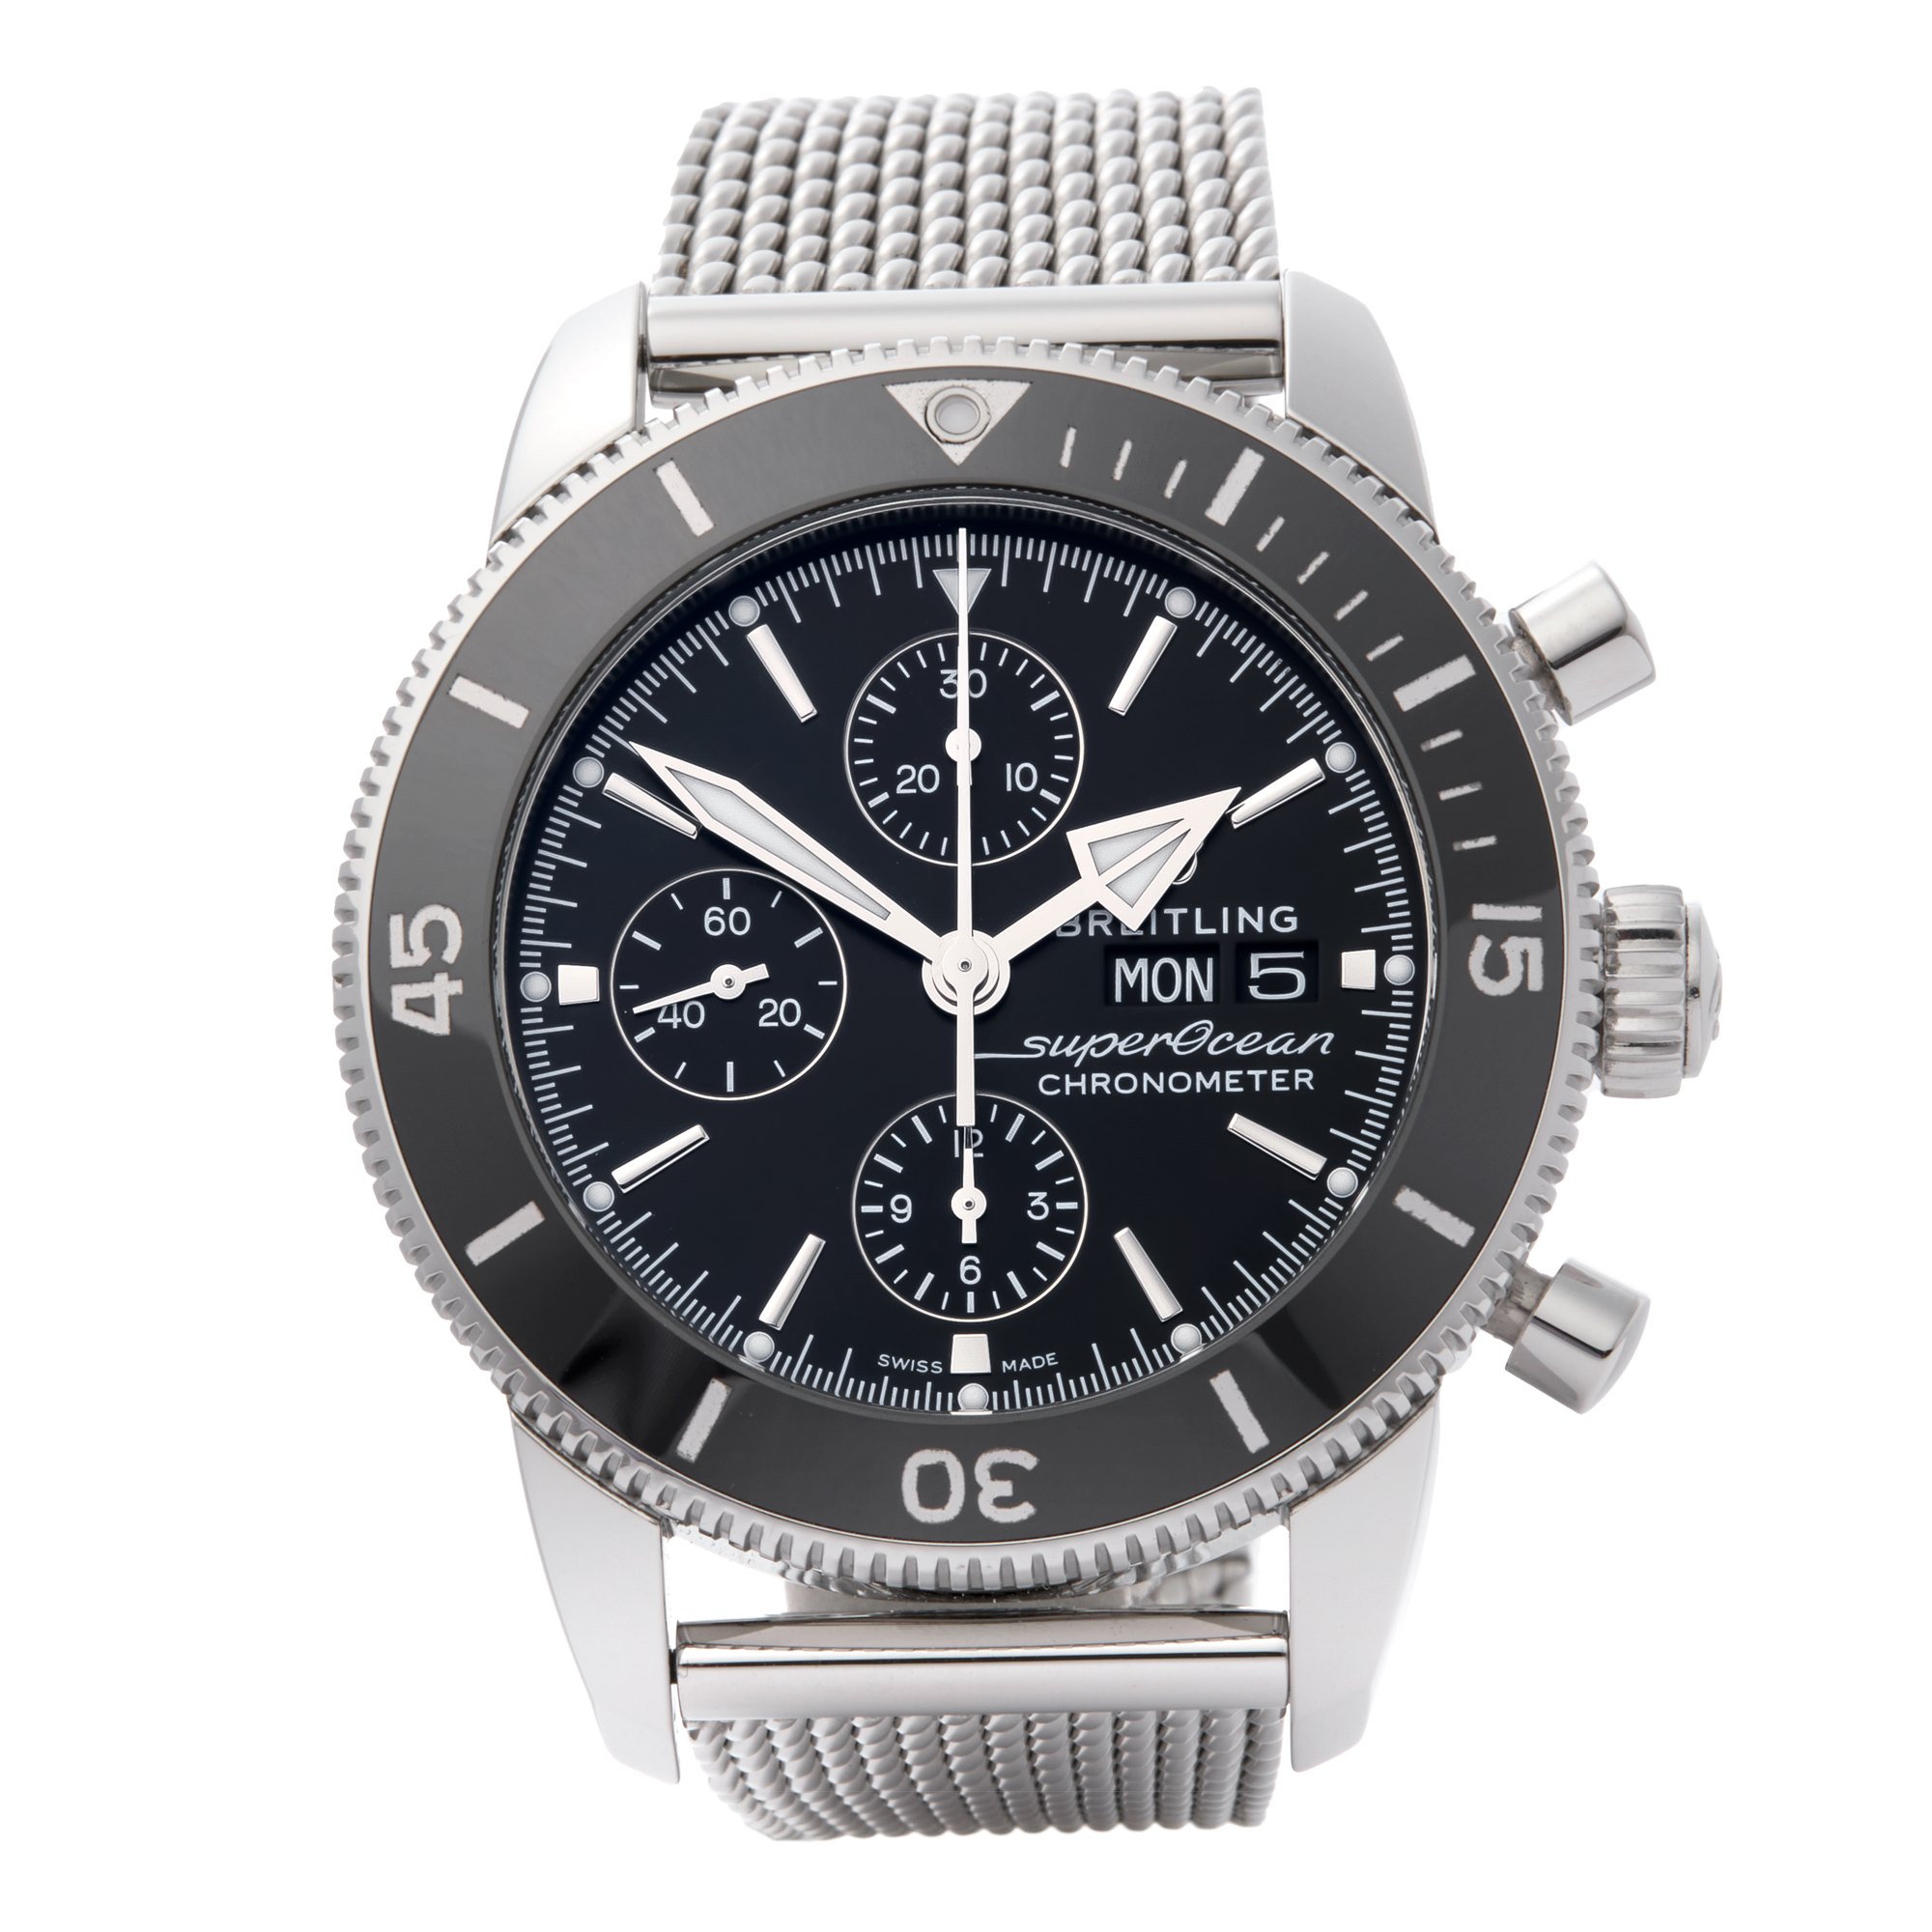 Breitling Superocean II Chronograph Stainless Steel A133131B1A1